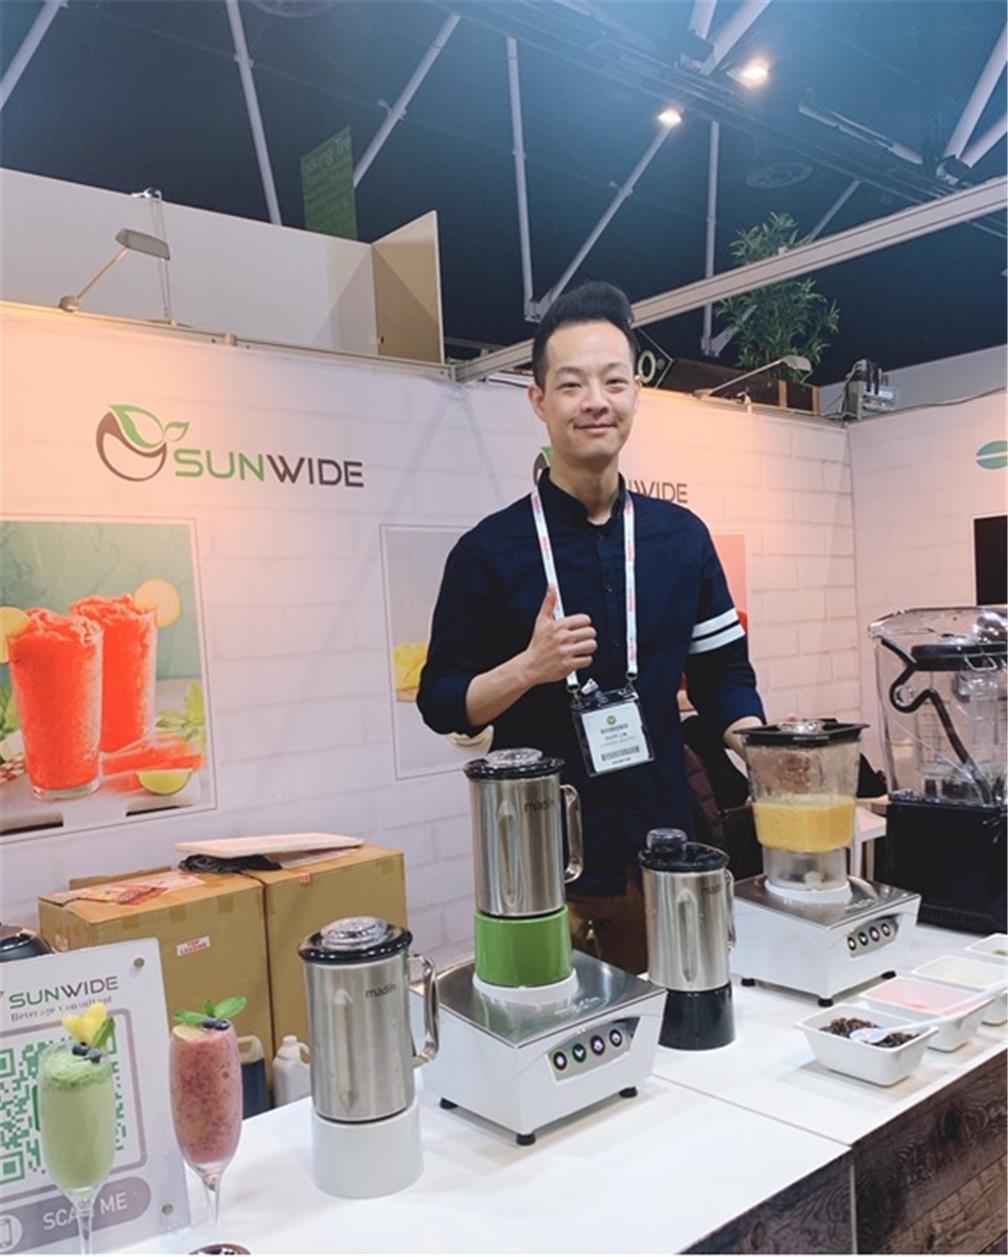 Duff Lin, the Founder and CEO of Sunwide.